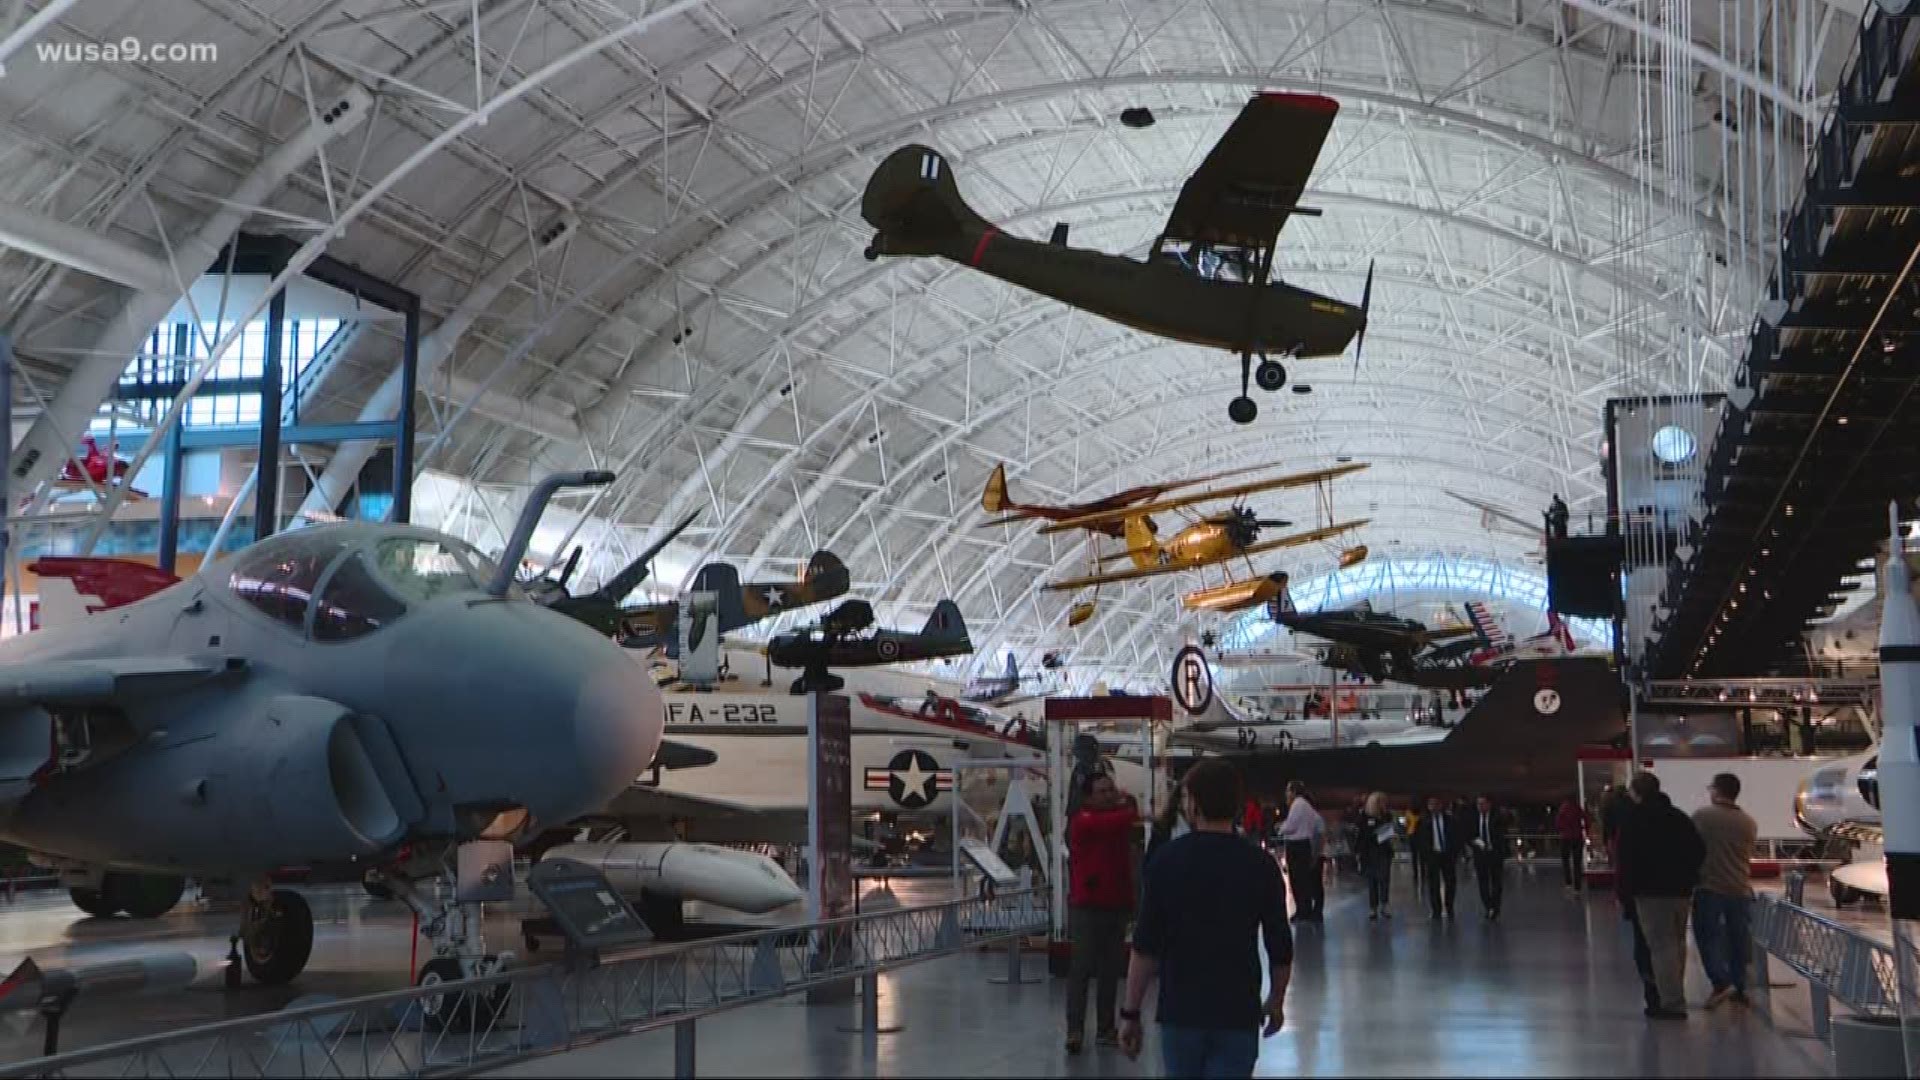 The National Air and Space Museum's Steven F. Udvar-Hazy Center celebrated it's 15th anniversary Saturday.